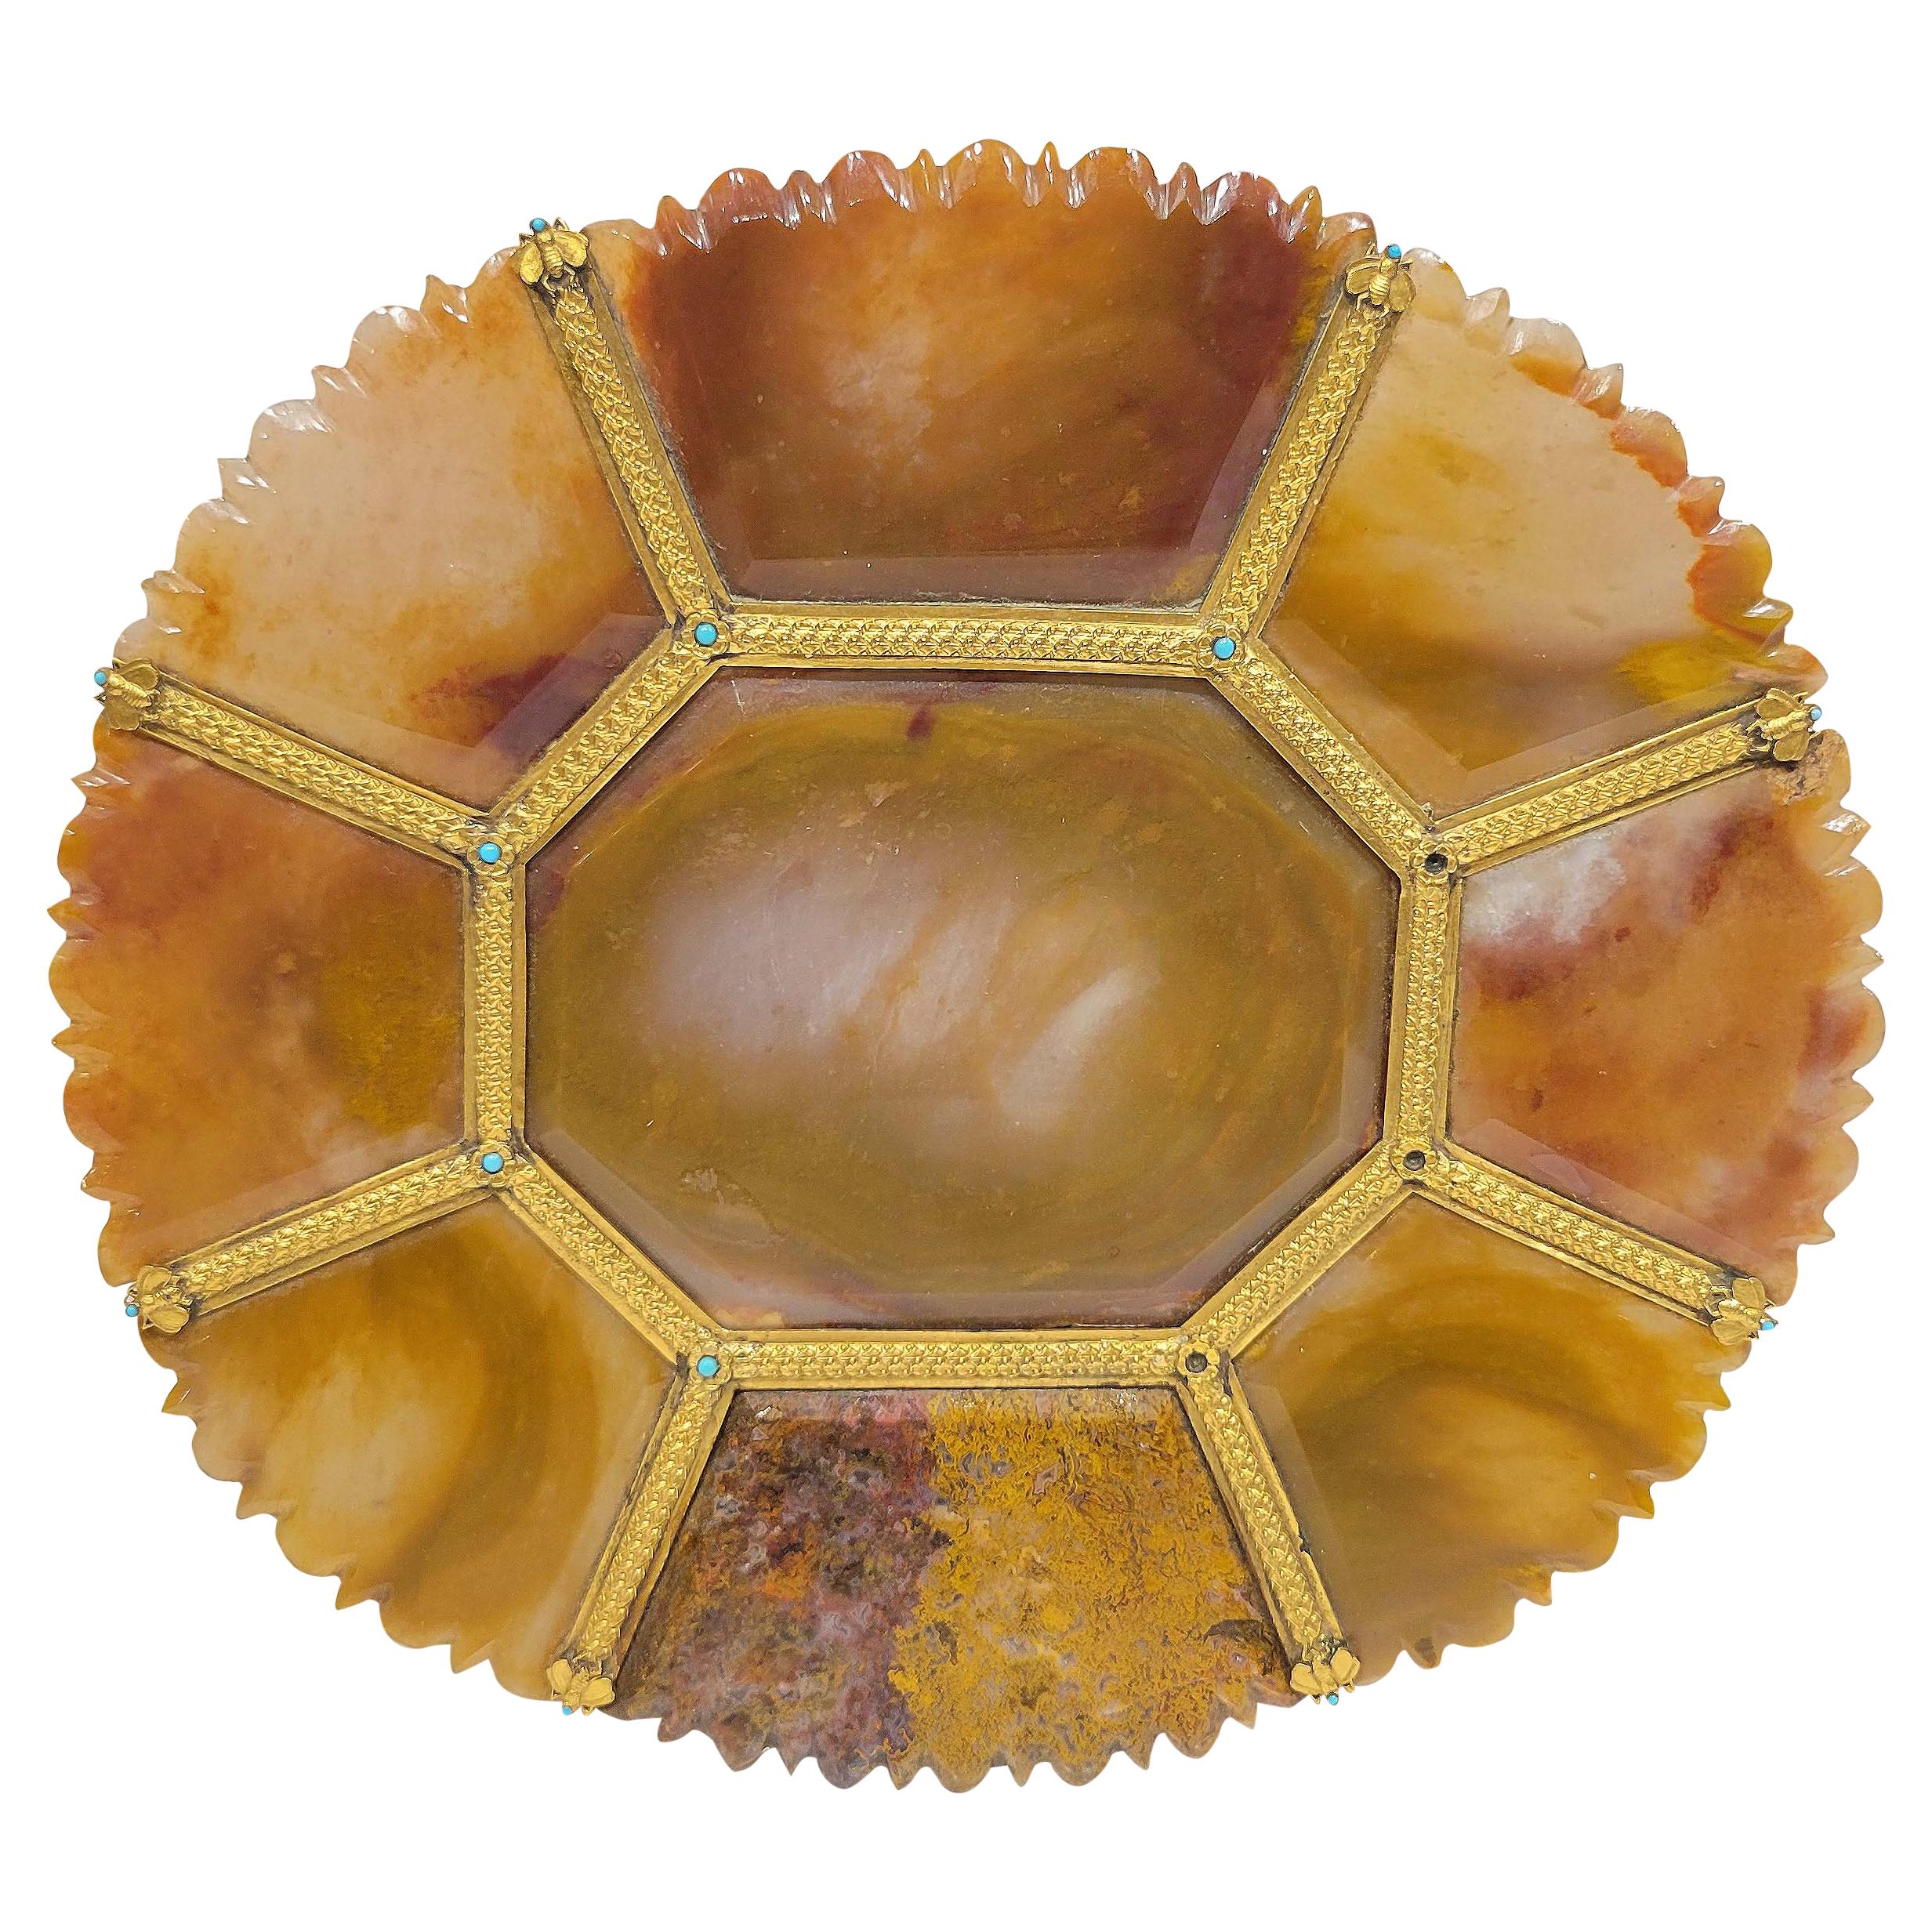 French Ormolu Mounted Agate Tray, Early 19th Century